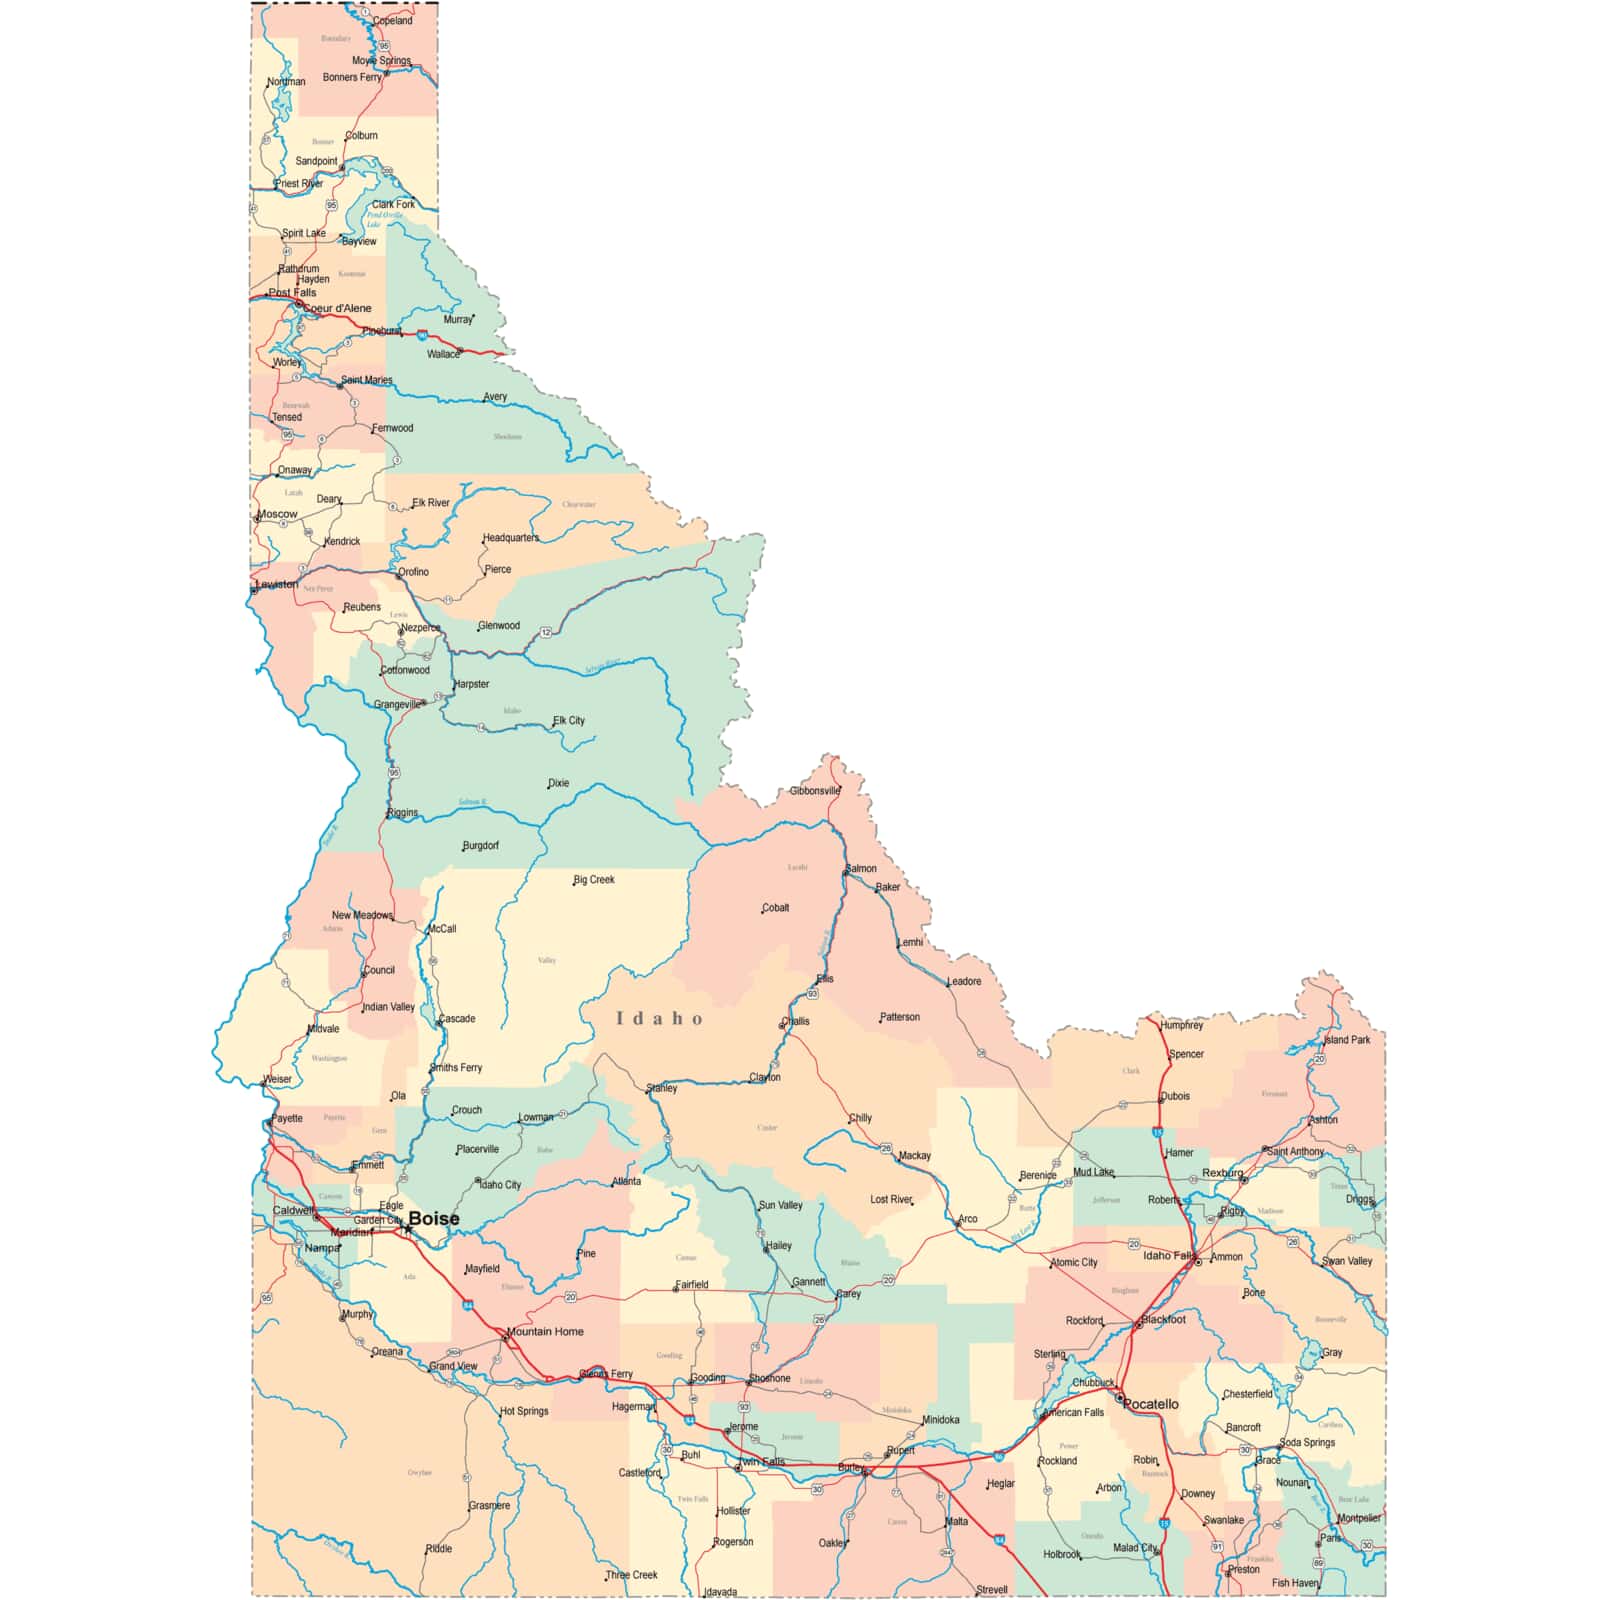 Idaho Road Map Square ?format=jpg&scale.option=fill&scale.width=1600&quality=60